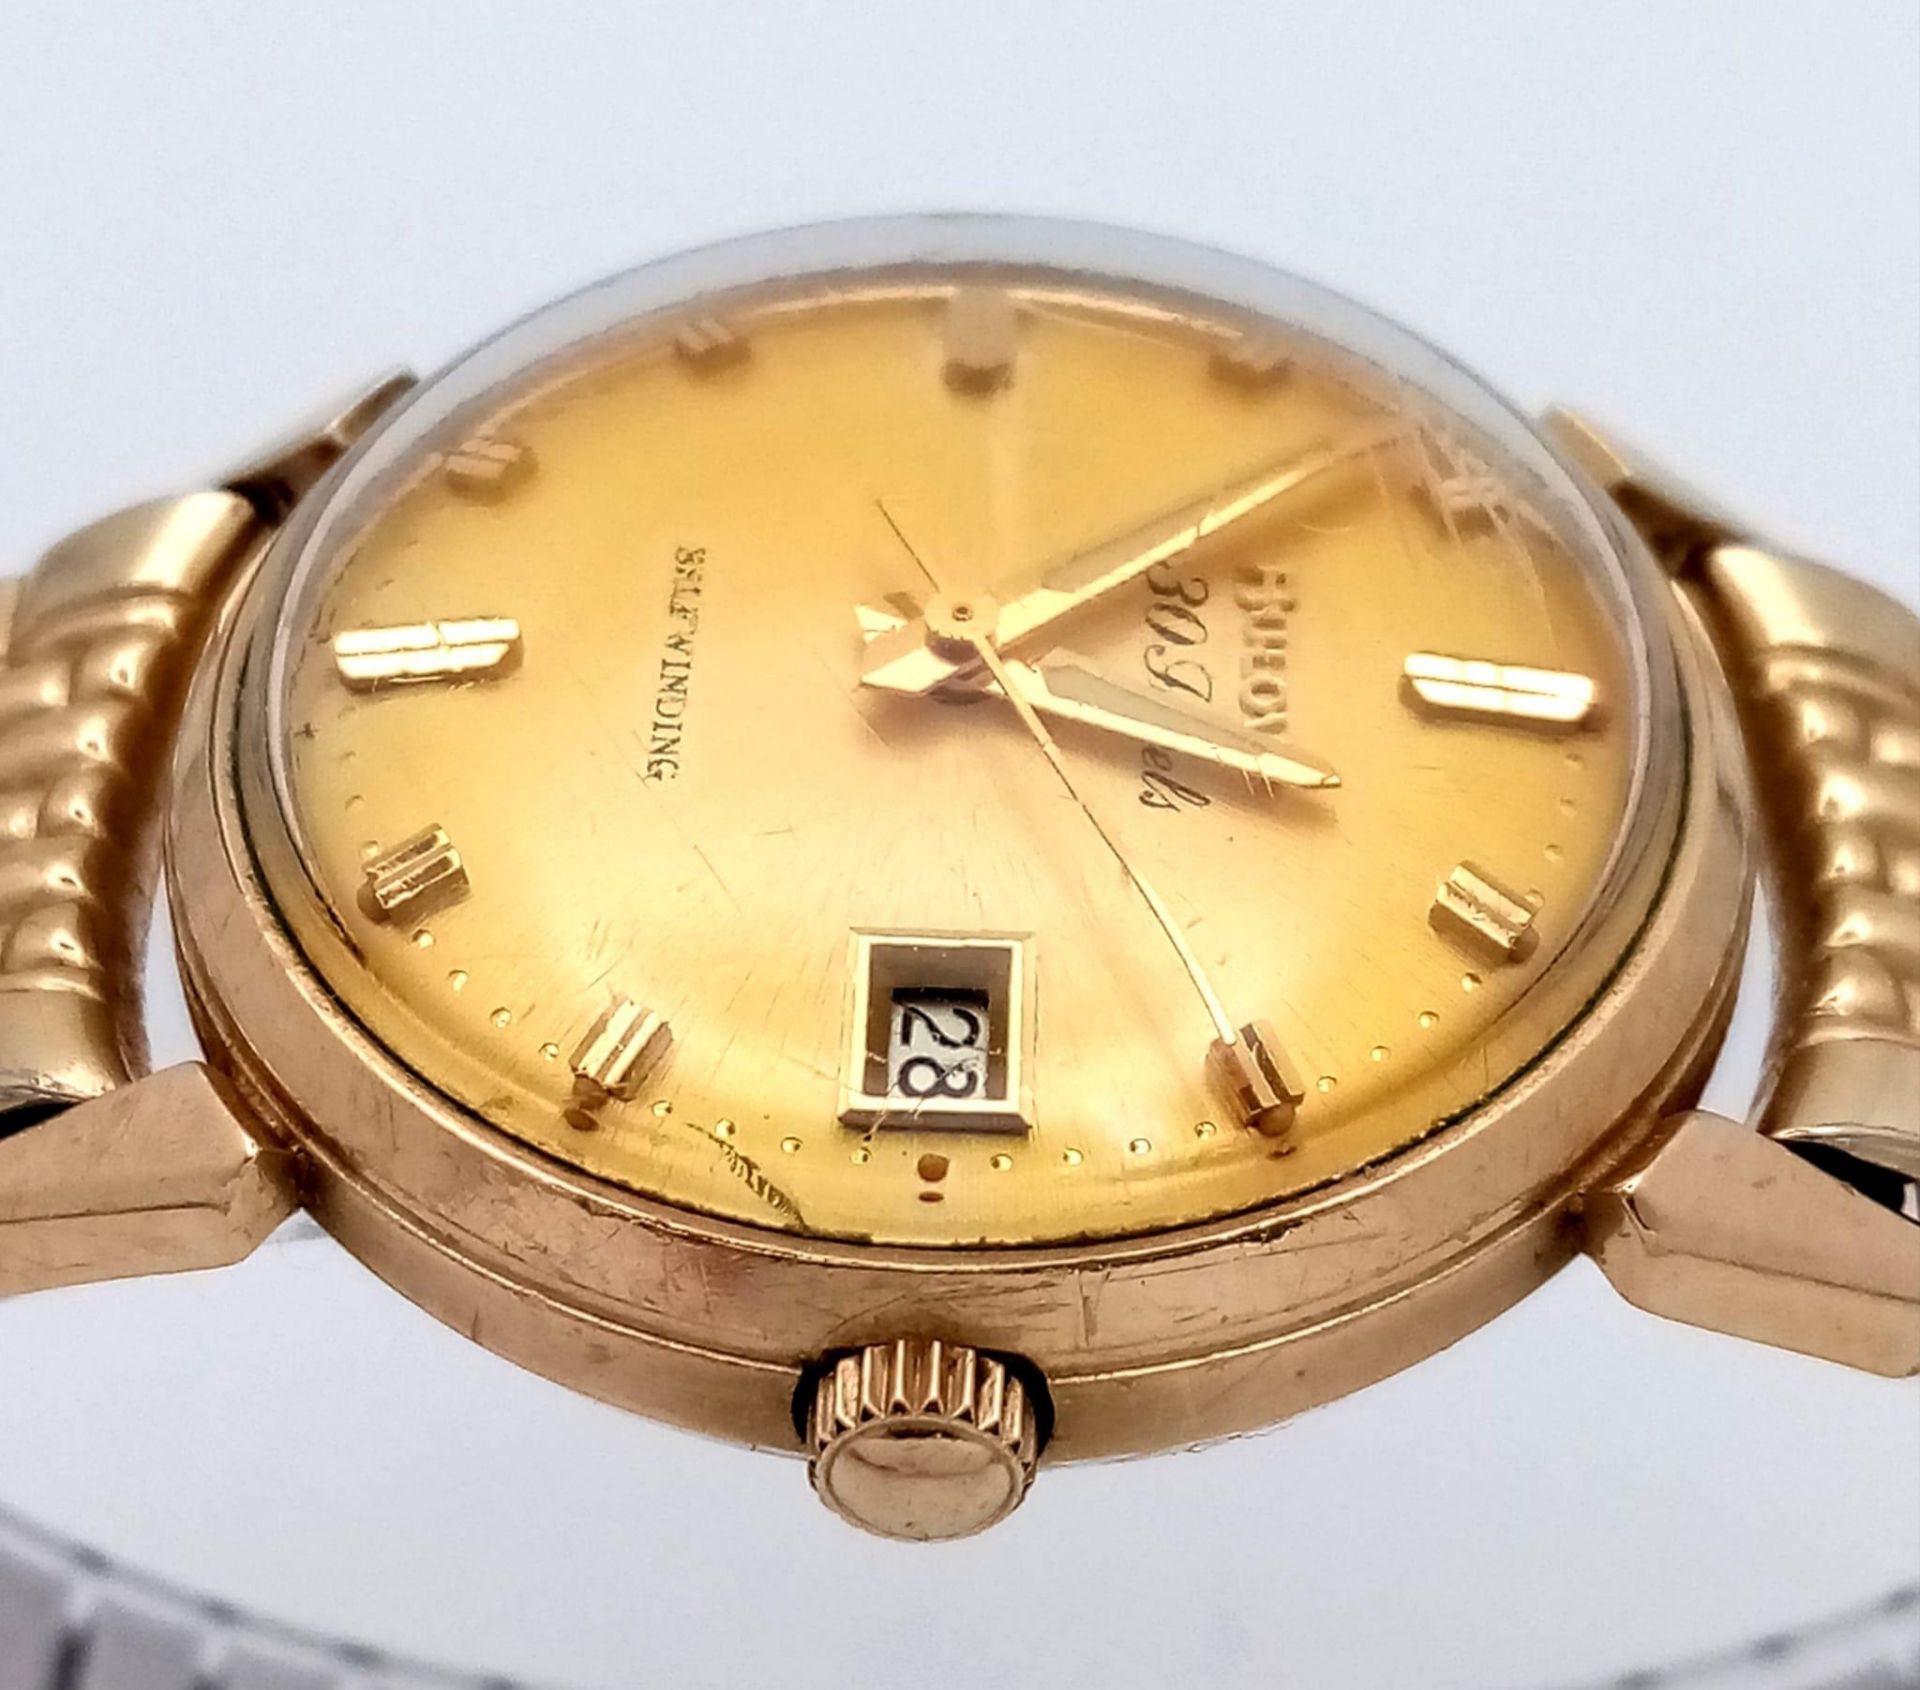 A Vintage 1960s Bulova Self-Winding Gents Watch. Gold plated expandable strap. Gold plated case - - Image 5 of 8